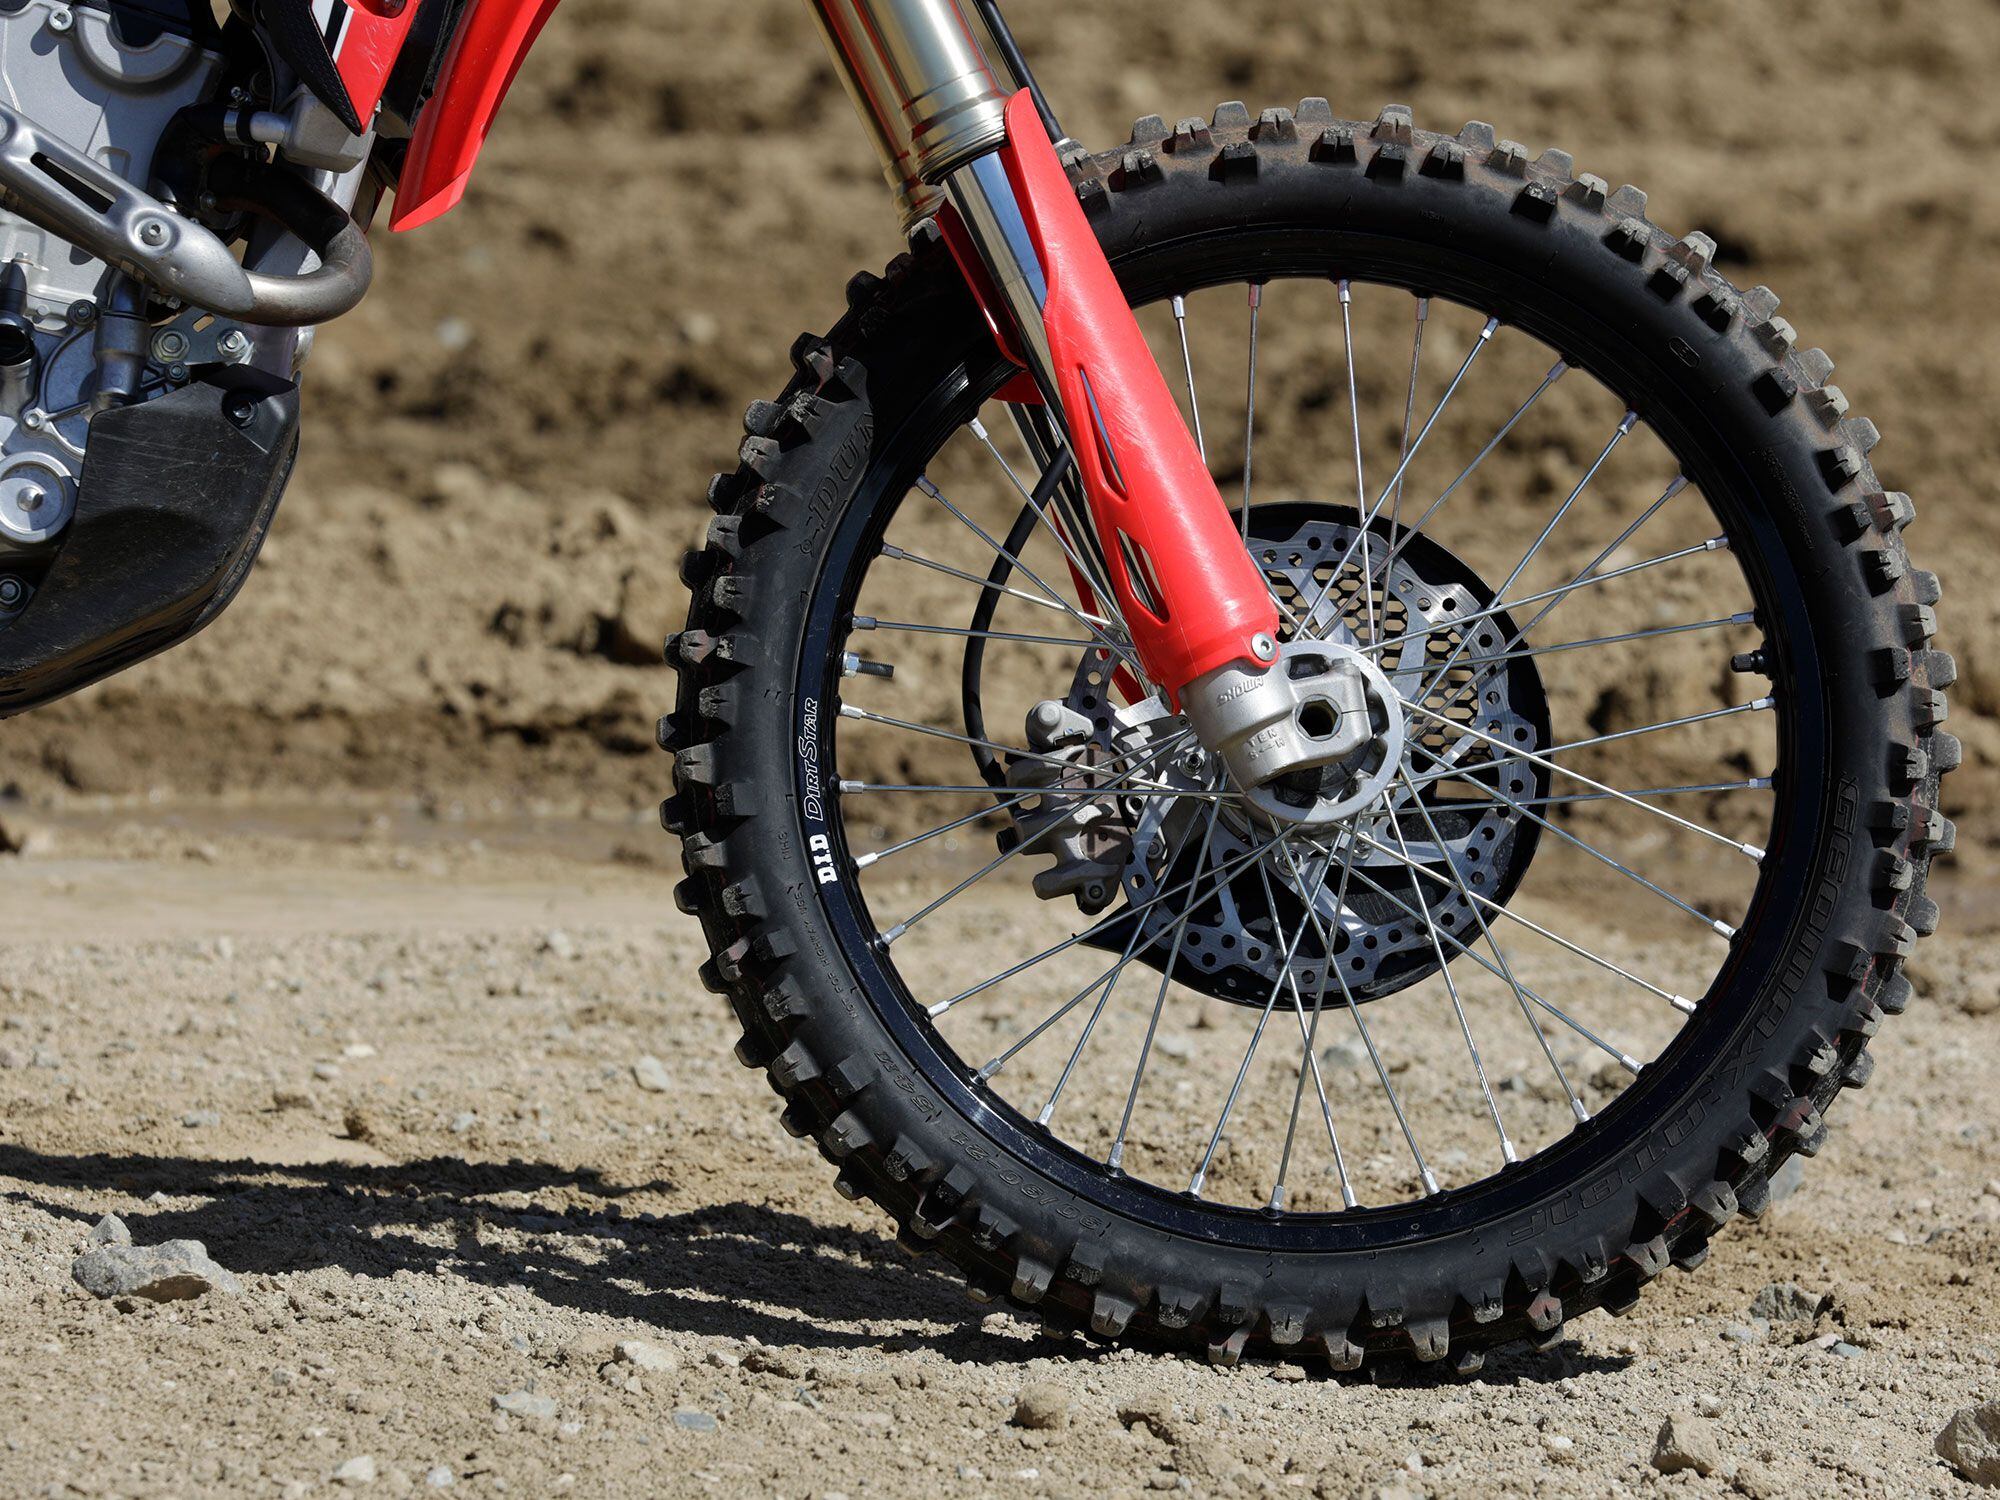 The CRF250RX rolls on a conventional 21-inch spoked rim shod with Dunlop’s versatile Geomax AT81 rubber.